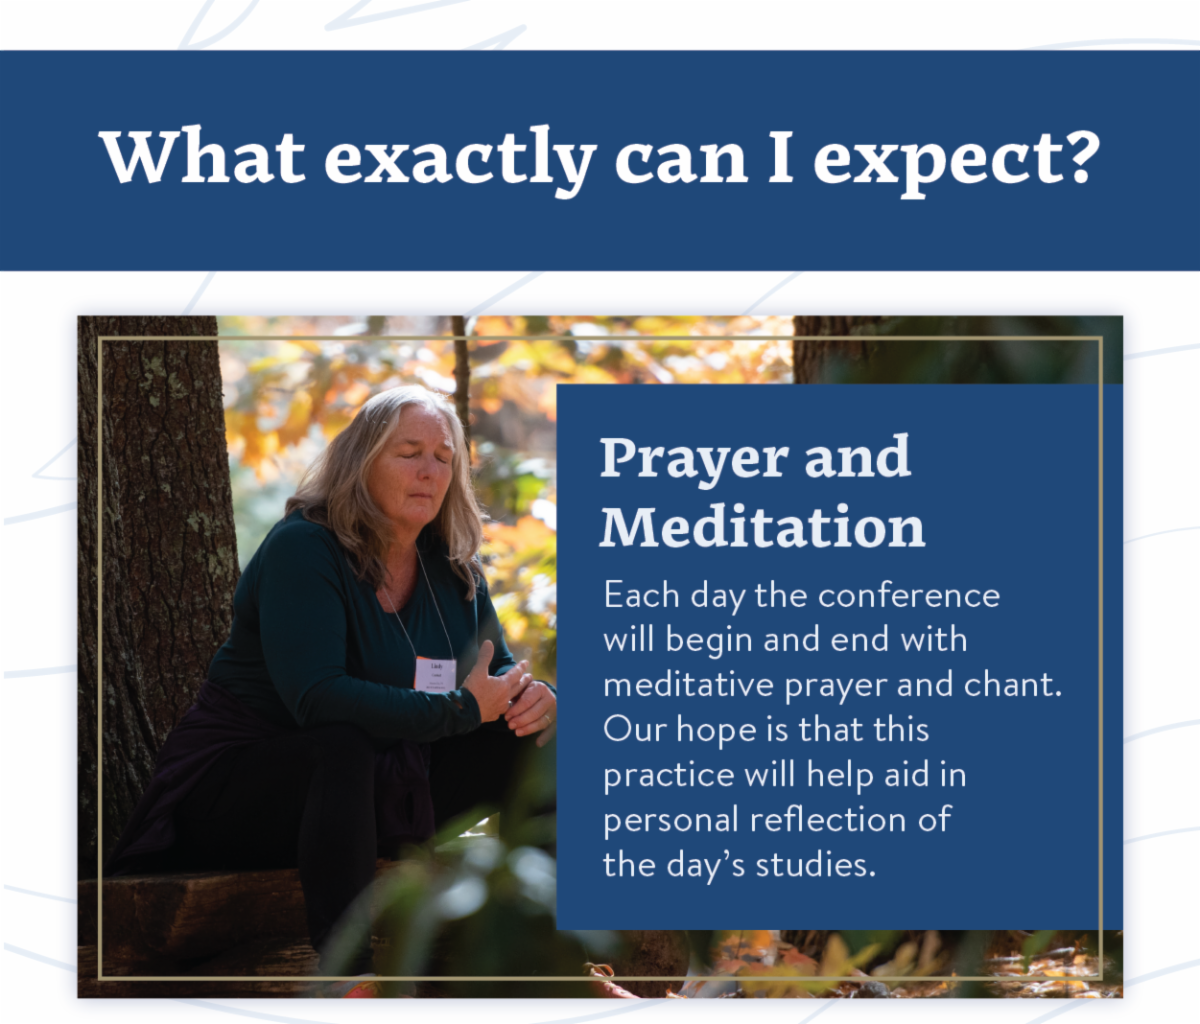 What exactly can I expect? - Prayer and Meditation - Each day the conference will begin and end with meditative prayer and chant. Our hope is that this practice will help aid in personal reflection of the day’s studies. 